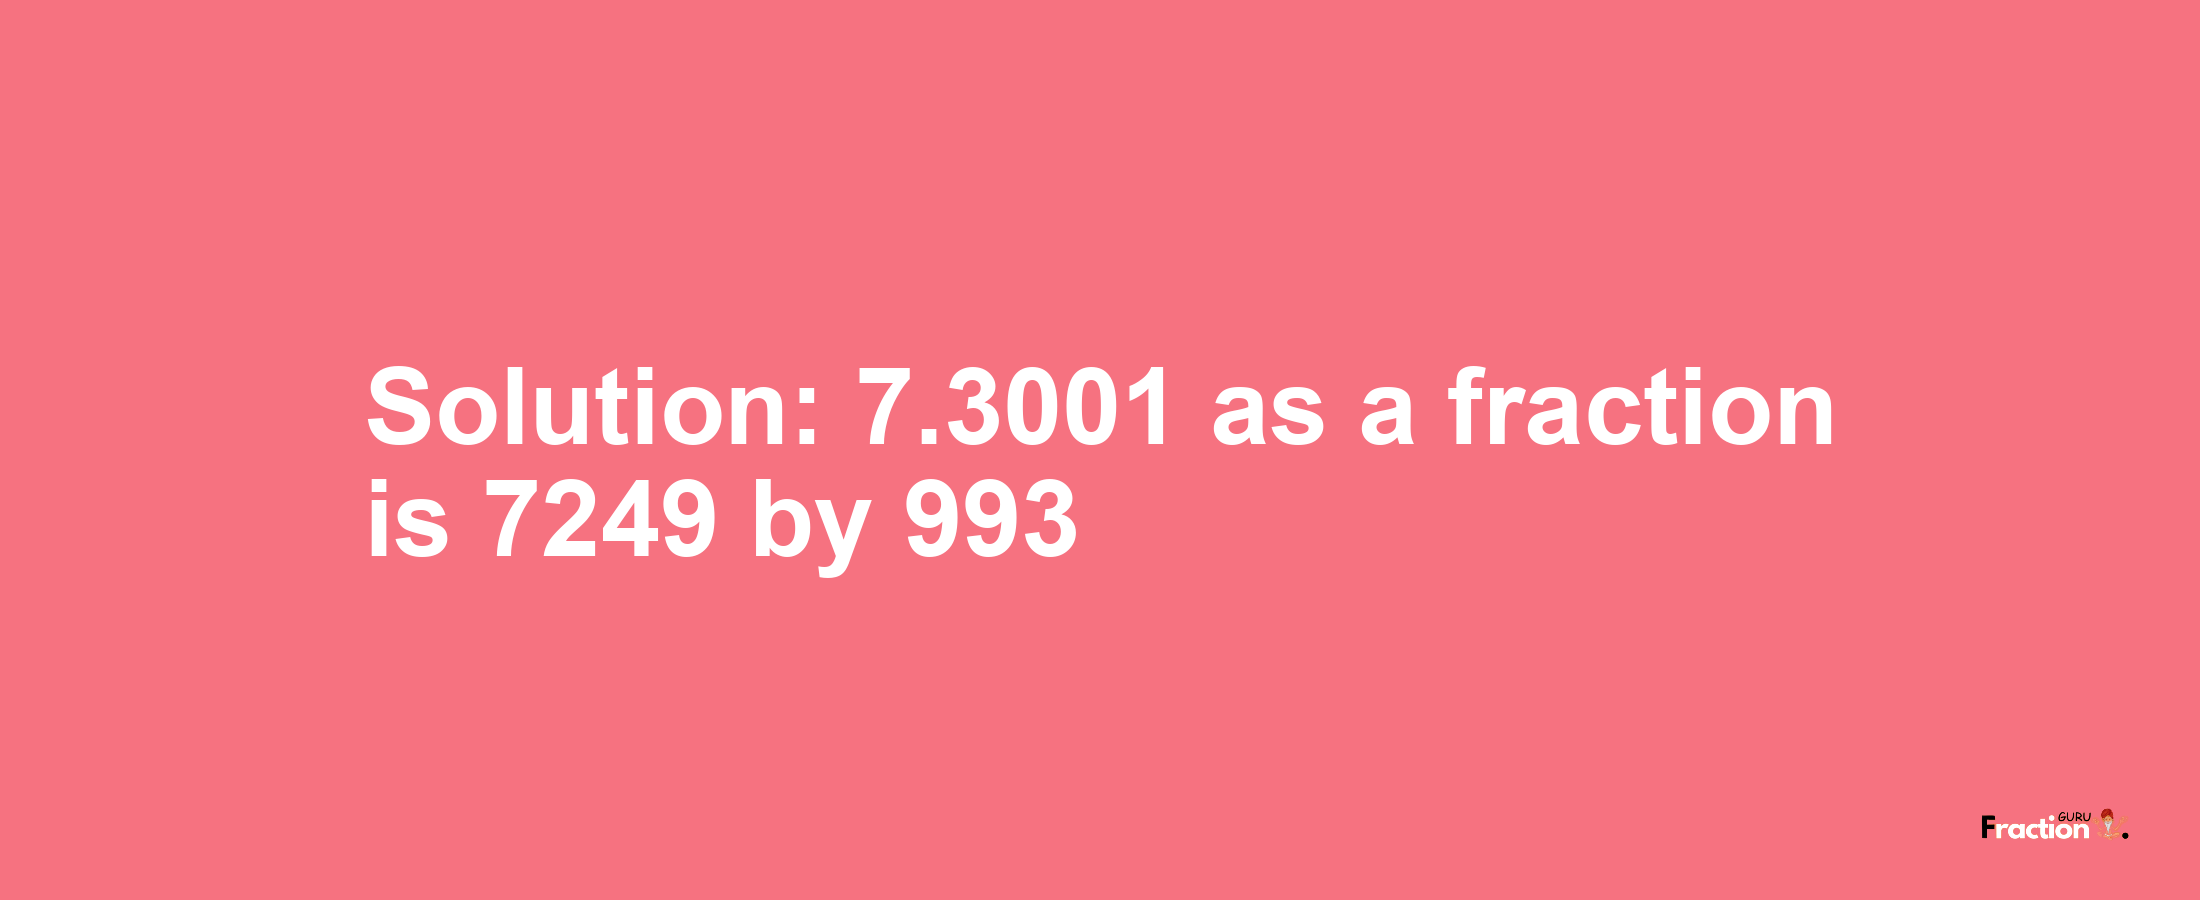 Solution:7.3001 as a fraction is 7249/993